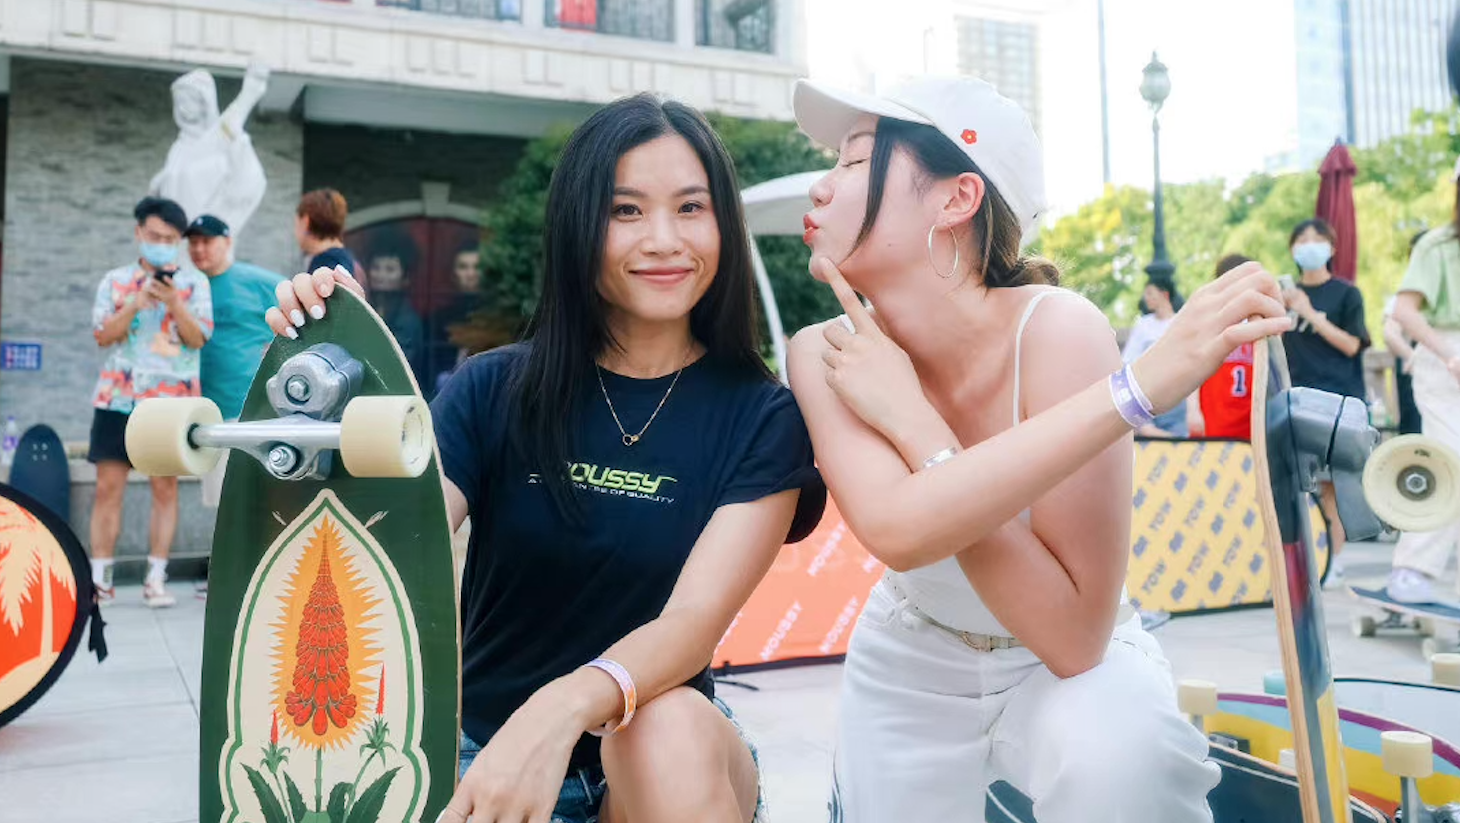 Land surfing is taking off in China. Over the past two years alone, 6 million locals have adopted the new hobby. How can brands tap the craze? Photo: Weibo